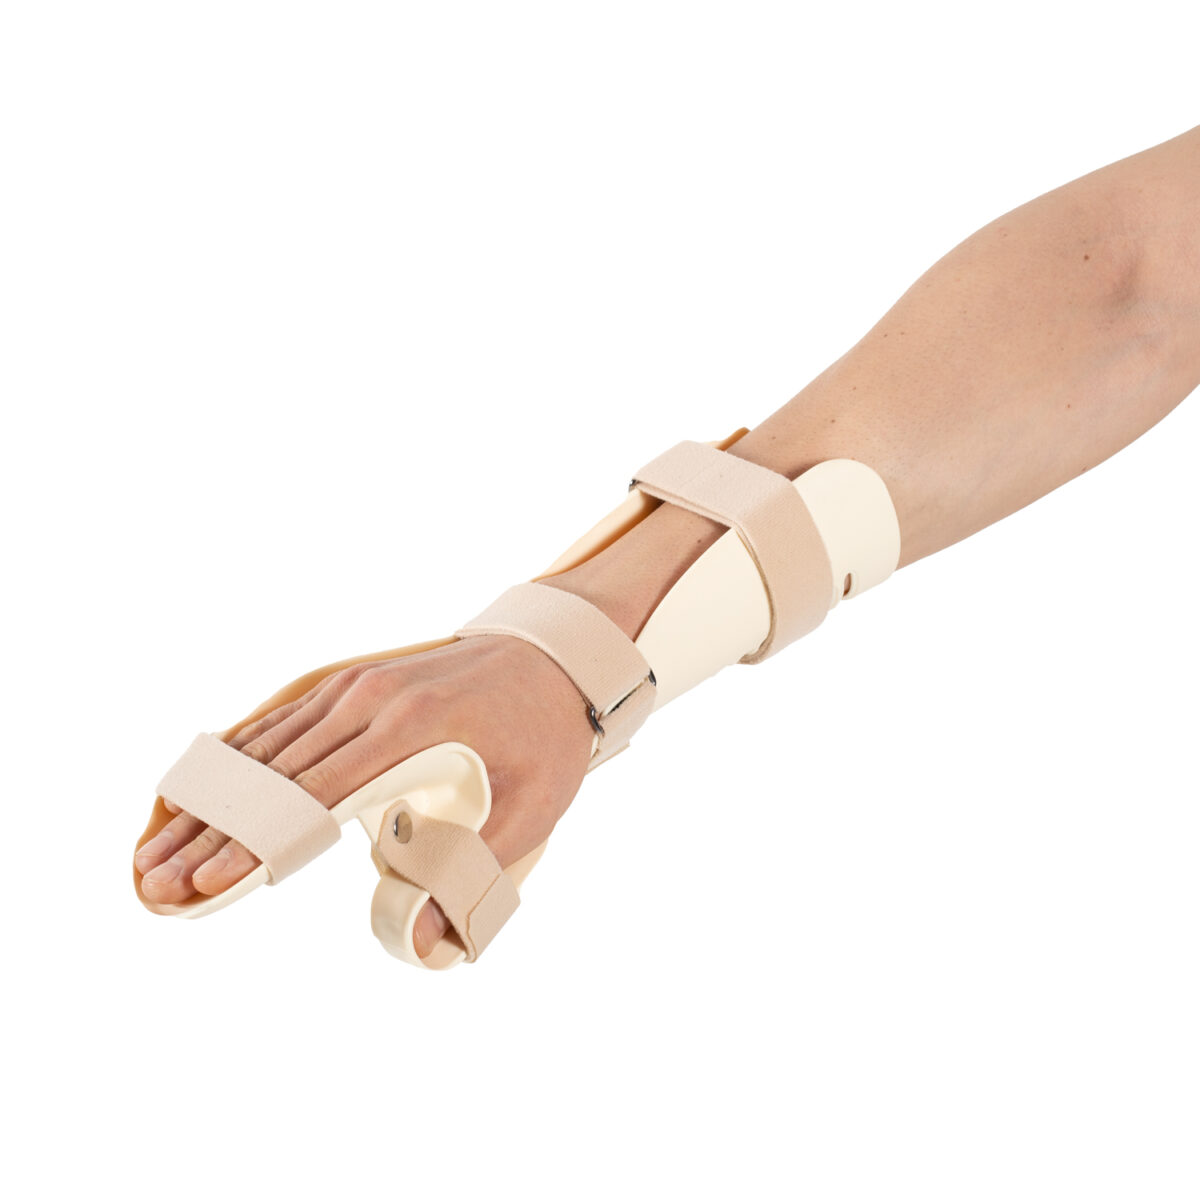 wingmed produits orthopédiques Orthèse Poignet Thermoplastique W341 46